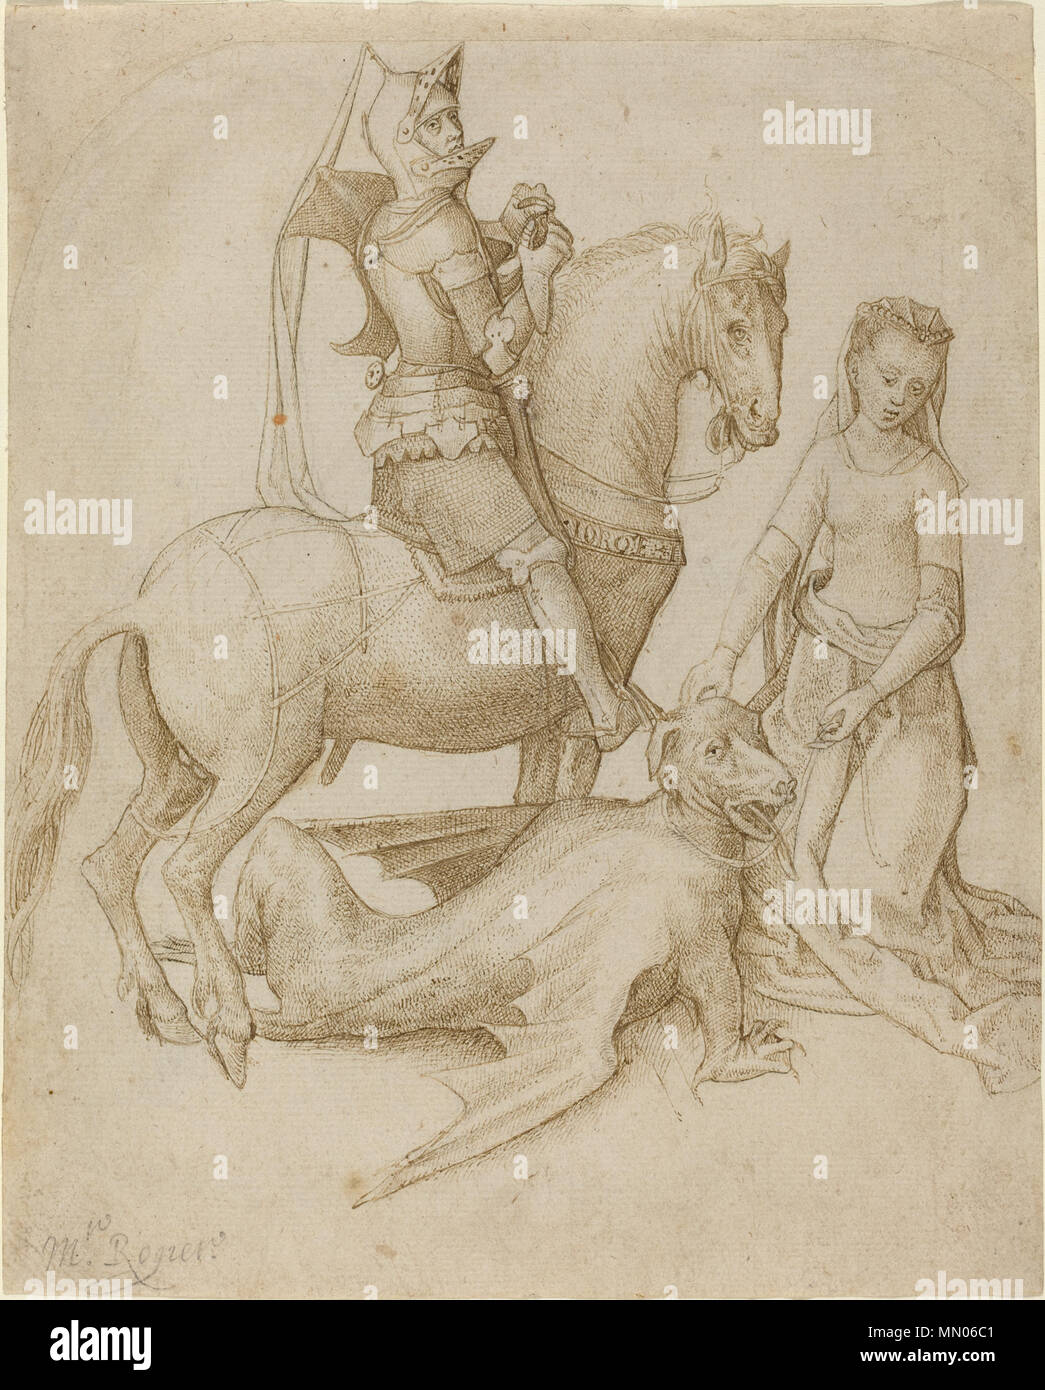 Drawing; pen and brown ink on laid paper; Overall (approximate): 20 x 16.6 cm (7 7/8 x 6 9/16 in.) support: 20.6 x 16.6 cm (8 1/8 x 6 9/16 in.); Hugo van der Goes - Saint George and the Dragon Stock Photo